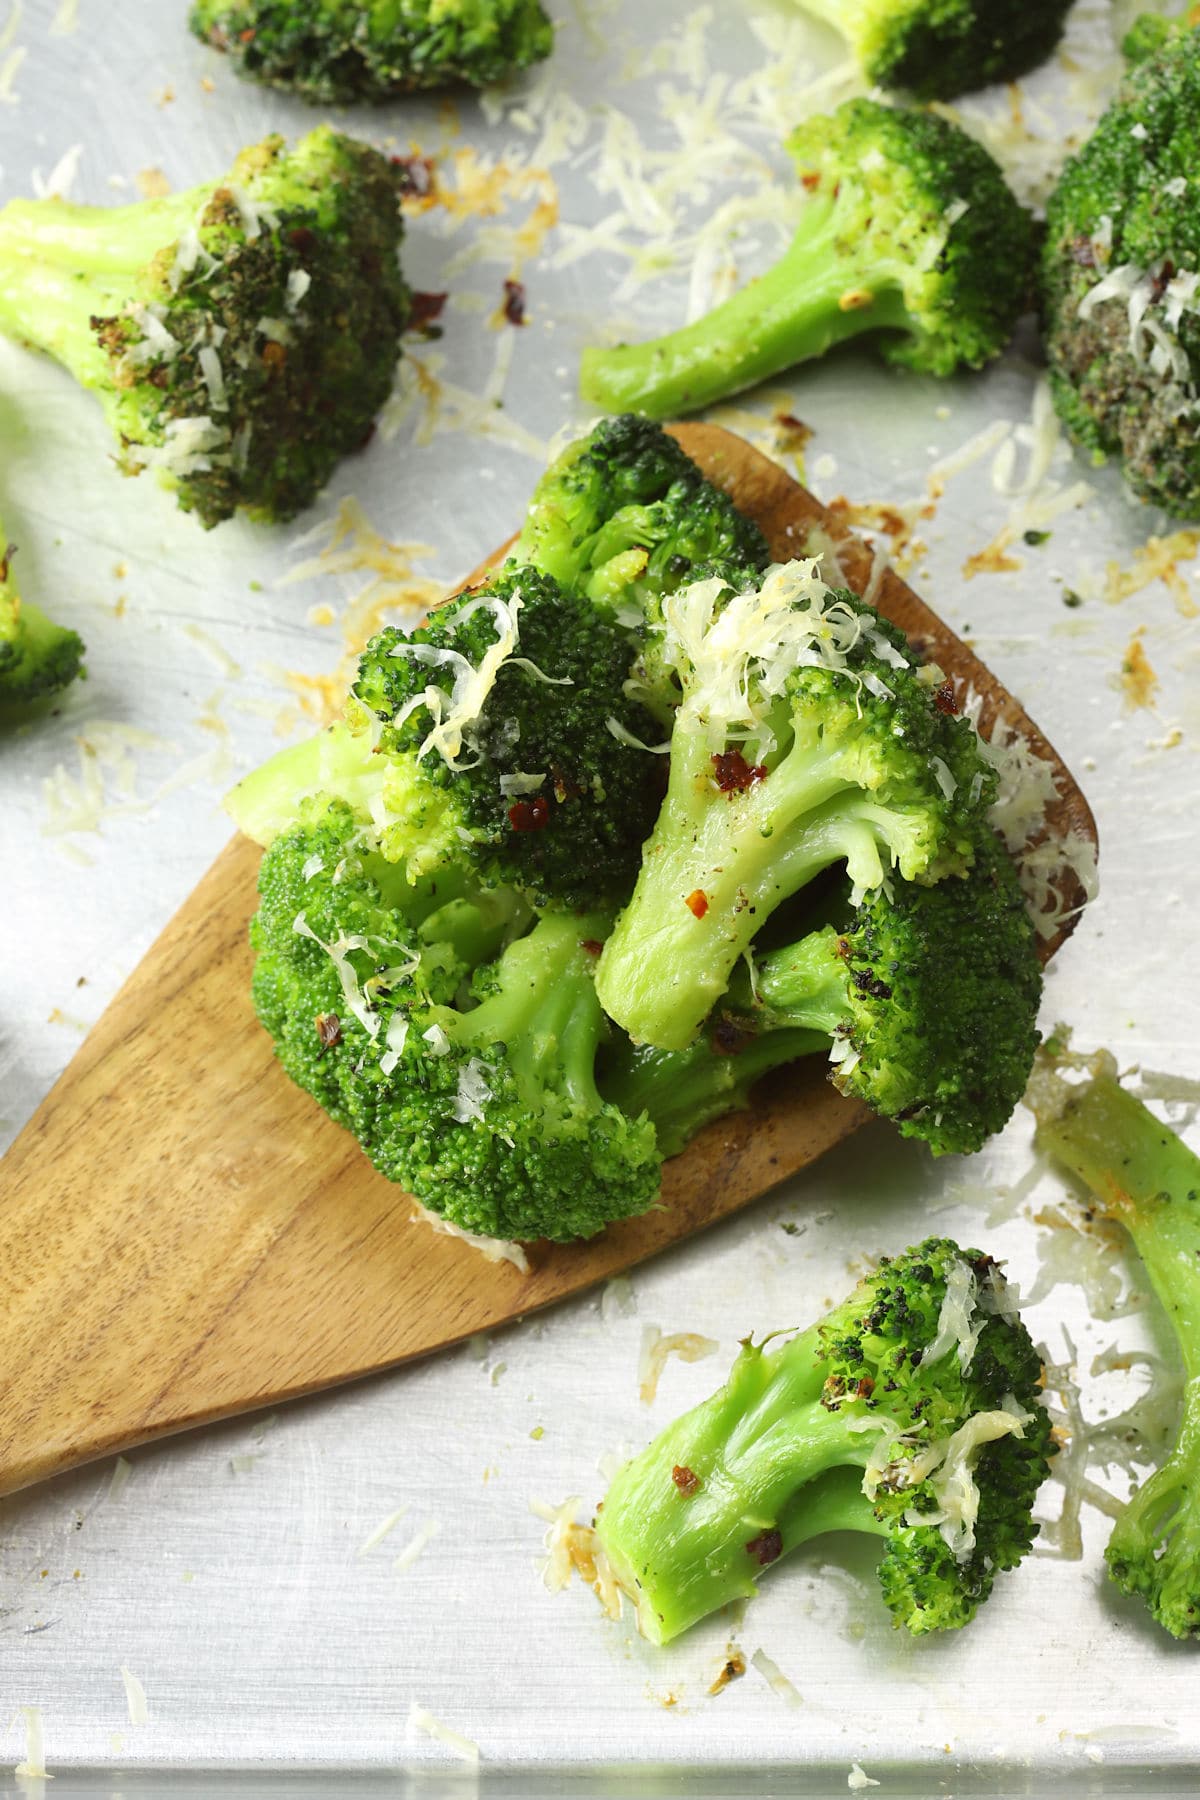 Wooden spatula filled with roasted broccoli on a metal sheet pan.